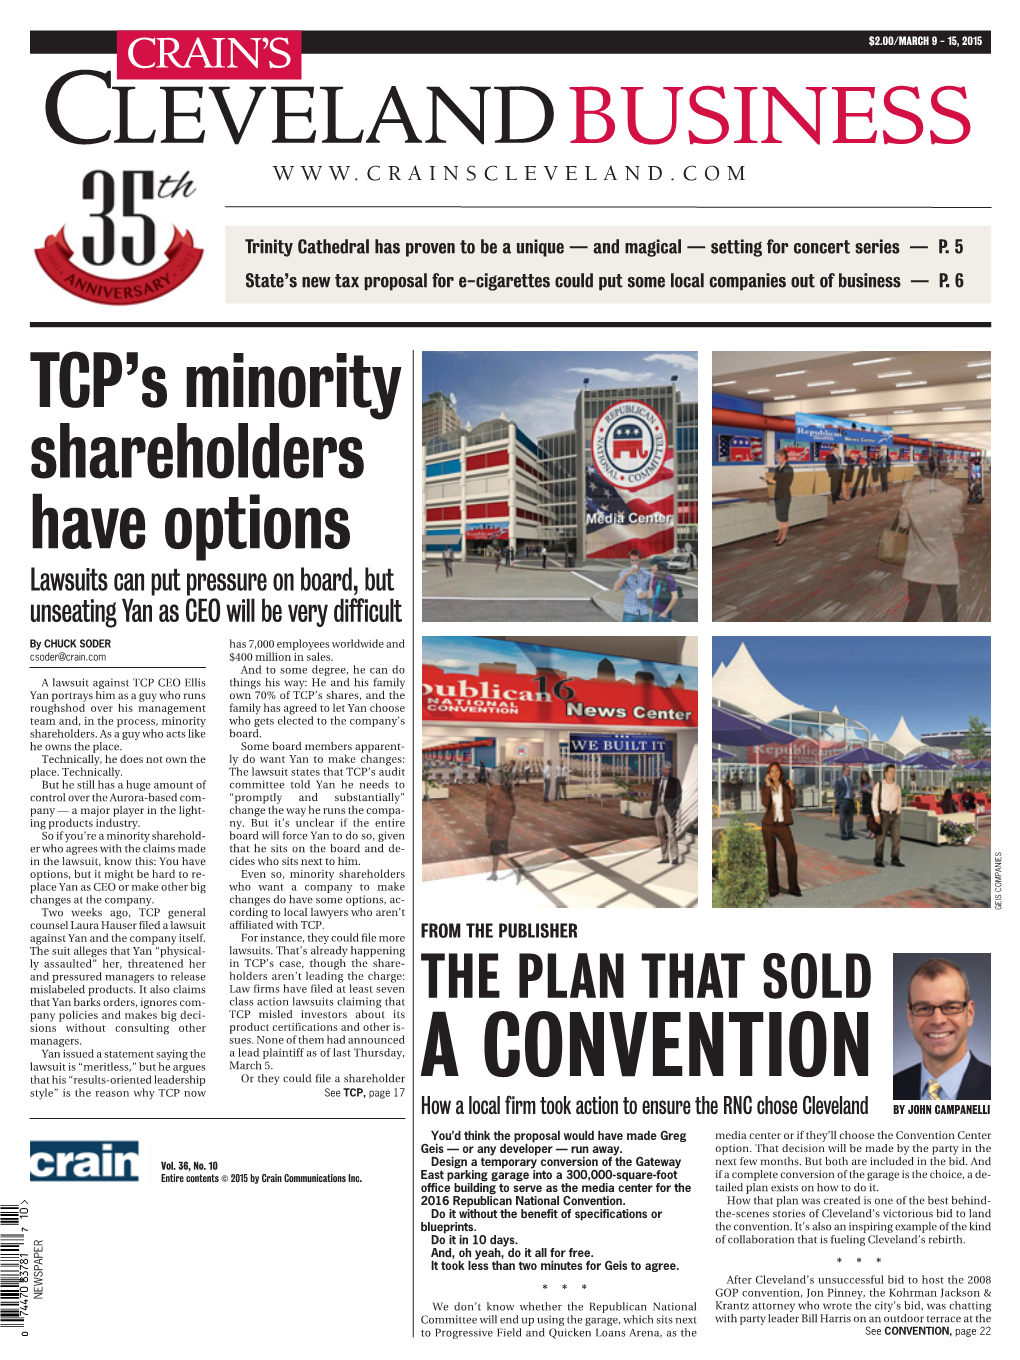 A CONVENTION Style” Is the Reason Why TCP Now See TCP, Page 17 How a Local Firm Took Action to Ensure the RNC Chose Cleveland by JOHN CAMPANELLI